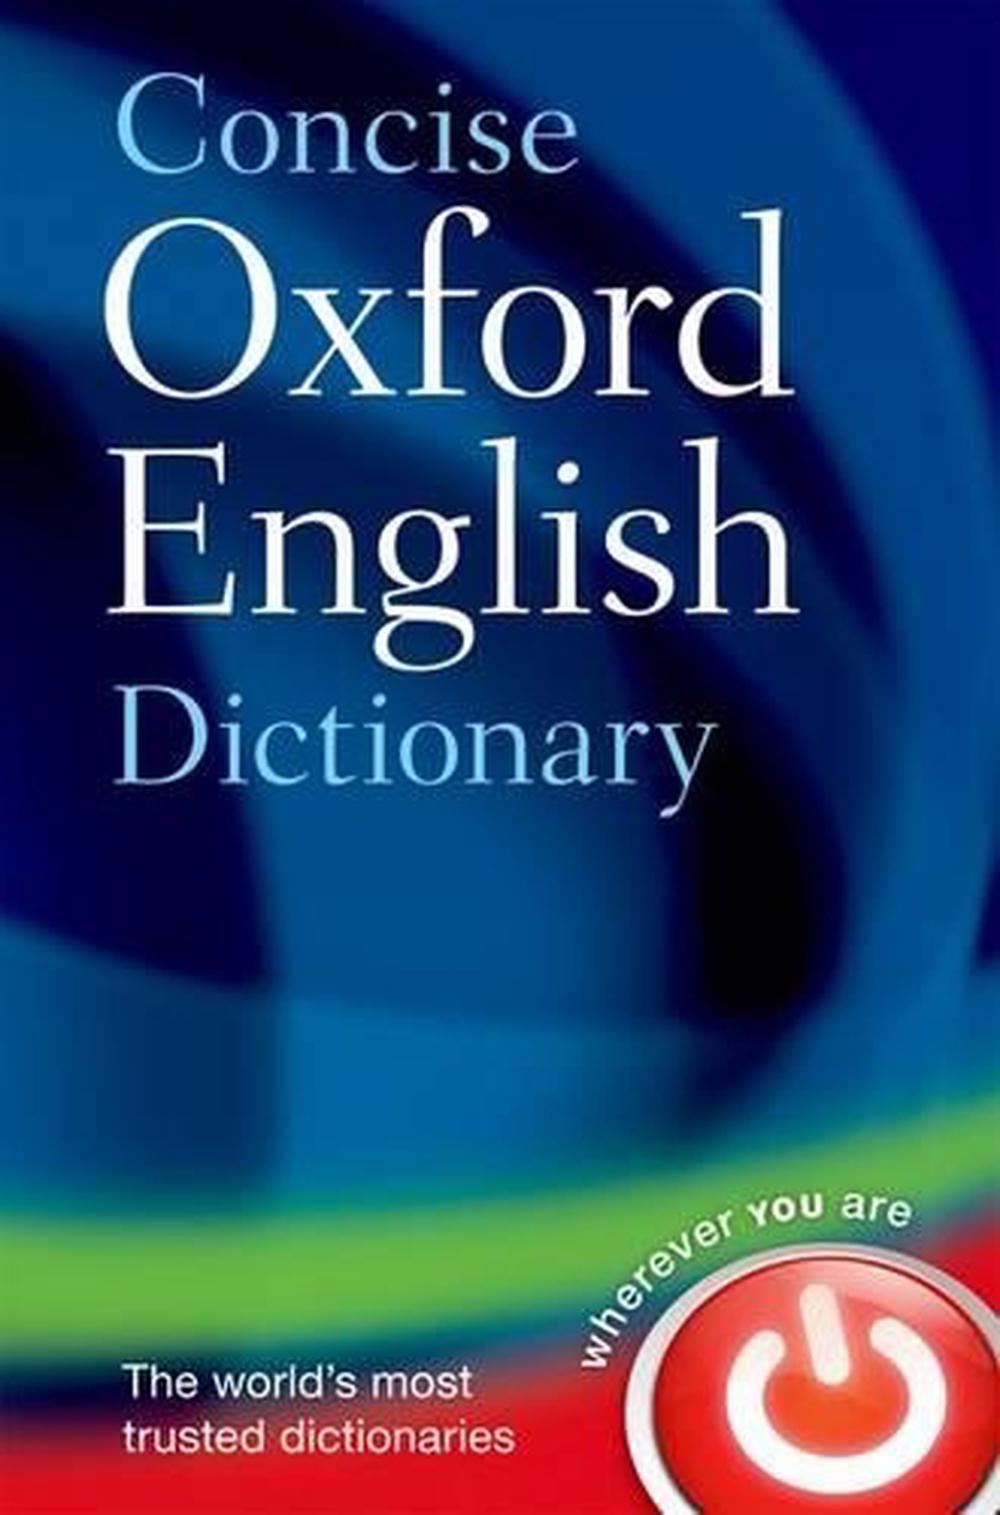 research meaning oxford dictionary